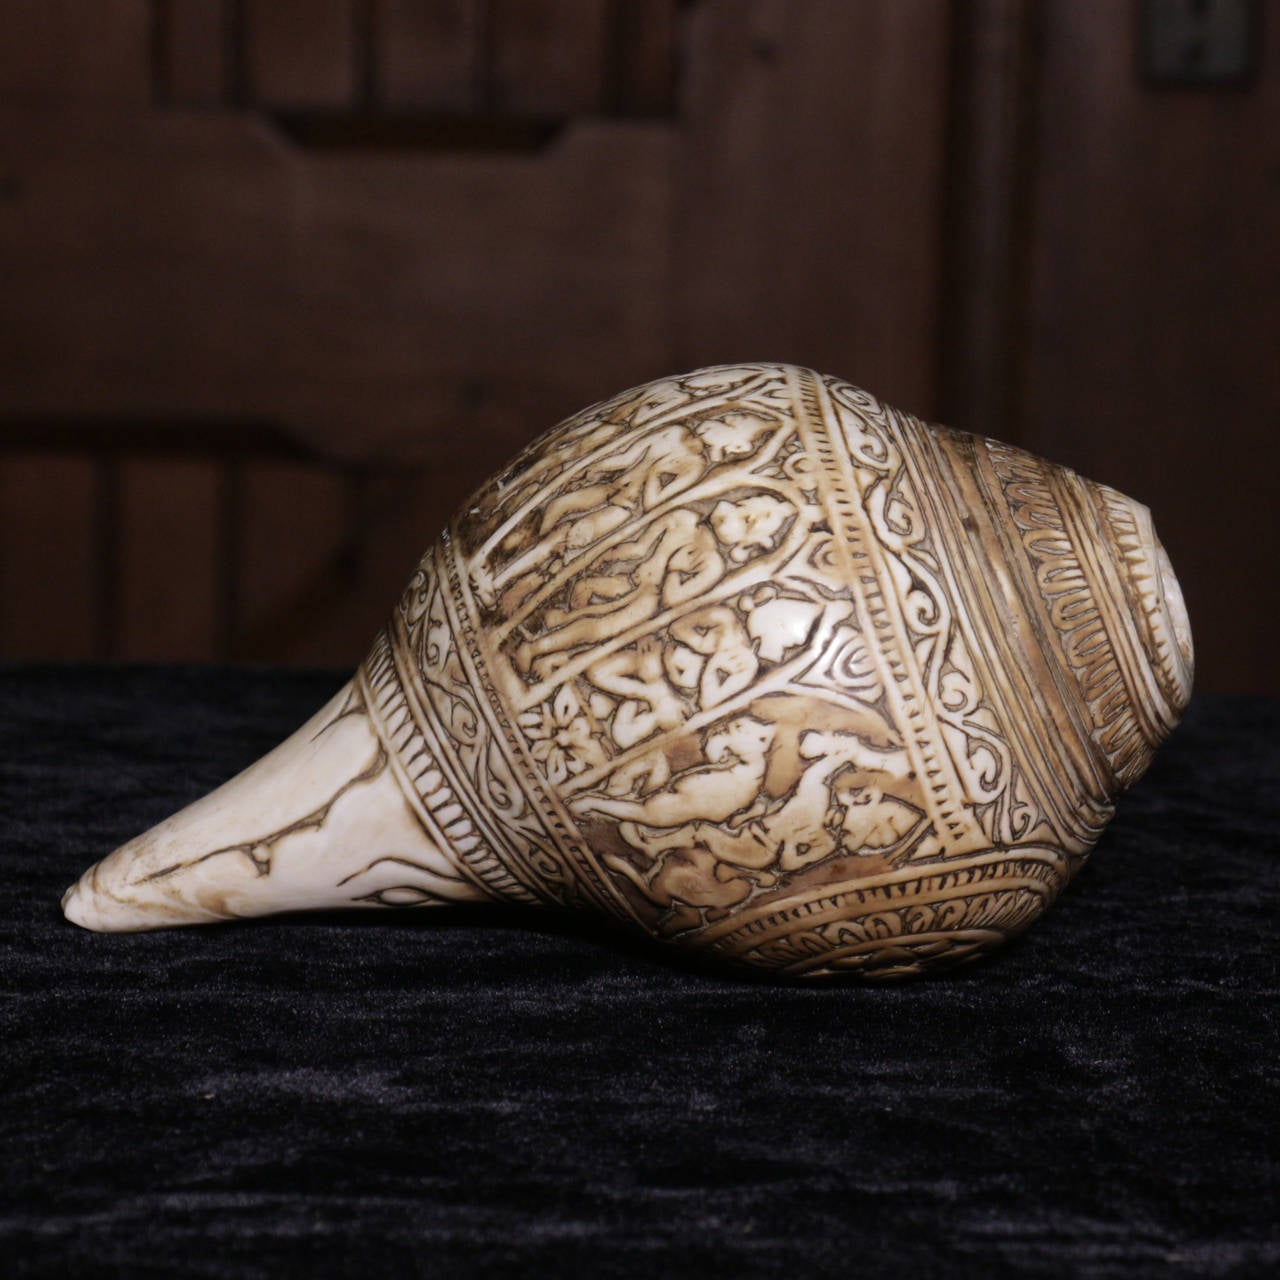 This conch shell is carved with various incarnations of the Hindu deity Vishnu including Narasimha. It dates from the India Pala dynasty circa 11th century.  In Asia, Conch shells have long been used as instruments in religious rituals. By blowing